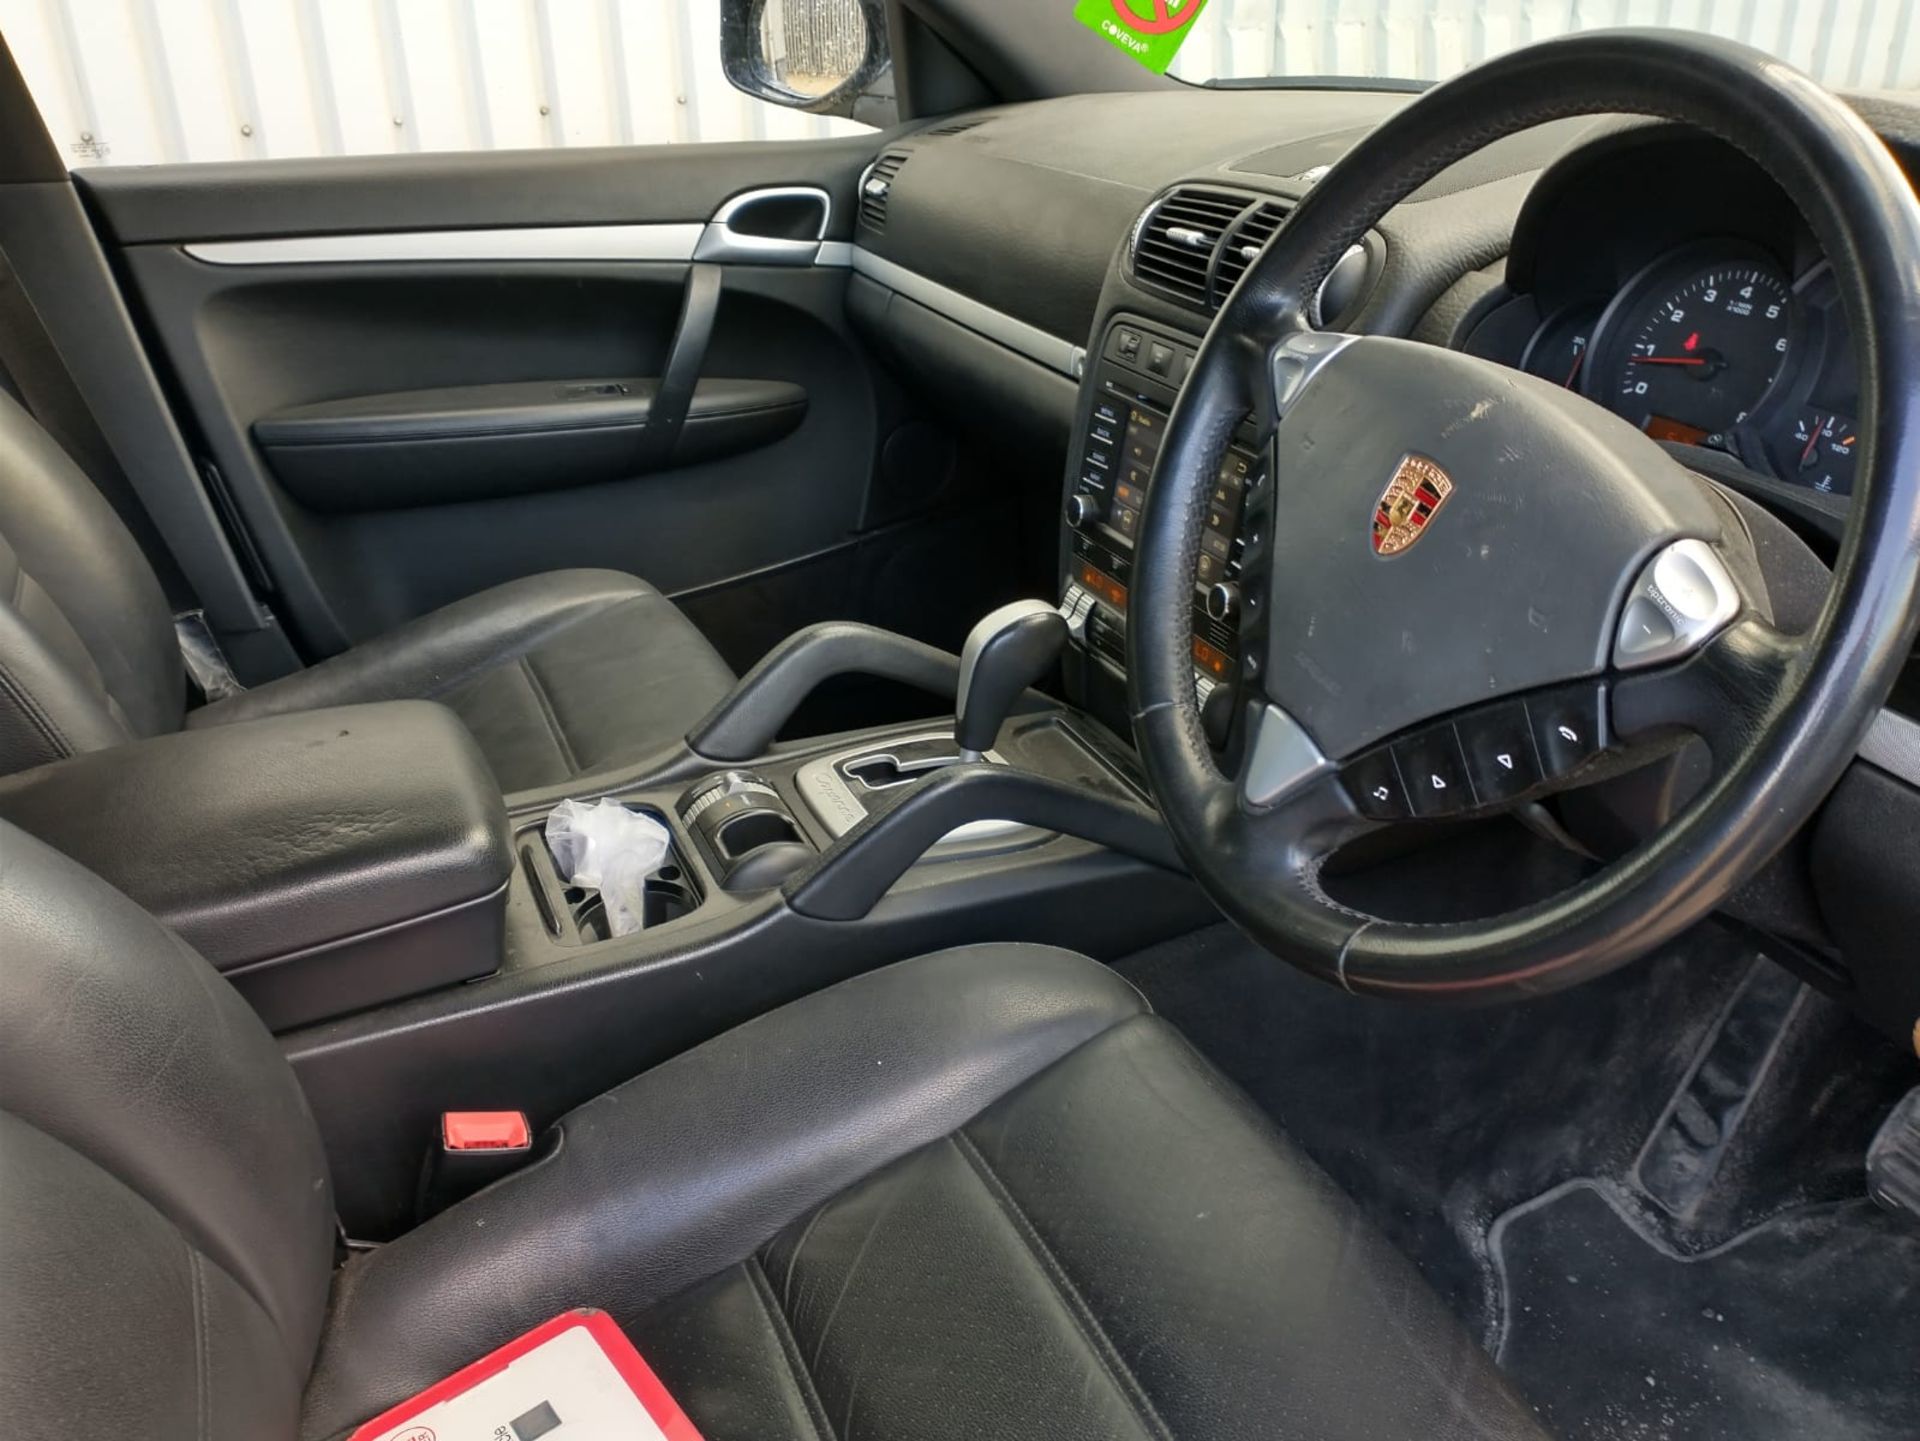 2008 Porsche Cayenne Tiptronic 3.6 5Dr SUV - CL505 - NO VAT ON THE HAMMER - Location: Corby, Northam - Image 4 of 16